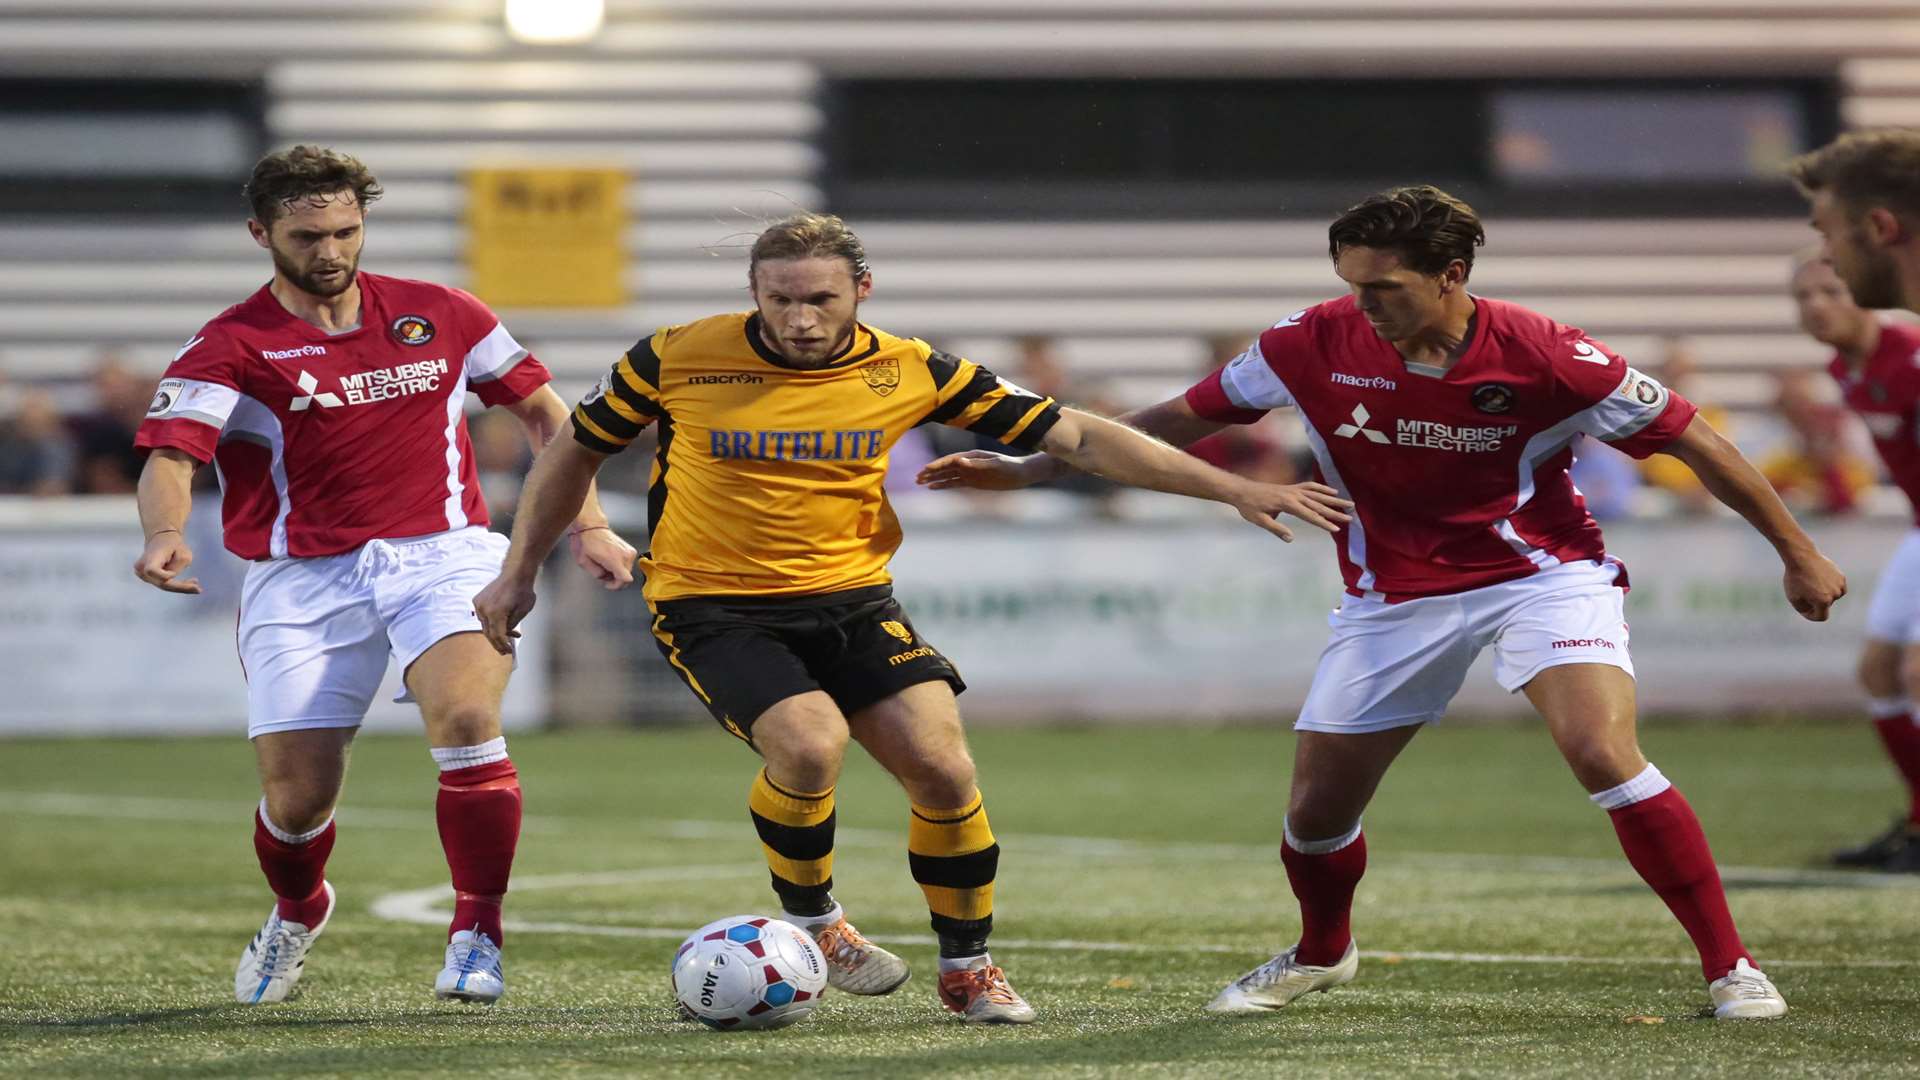 Matt Bodkin takes on Dean Rance and Joe Howe during Ebbsfleet's win at Maidstone in August Picture: Martin Apps